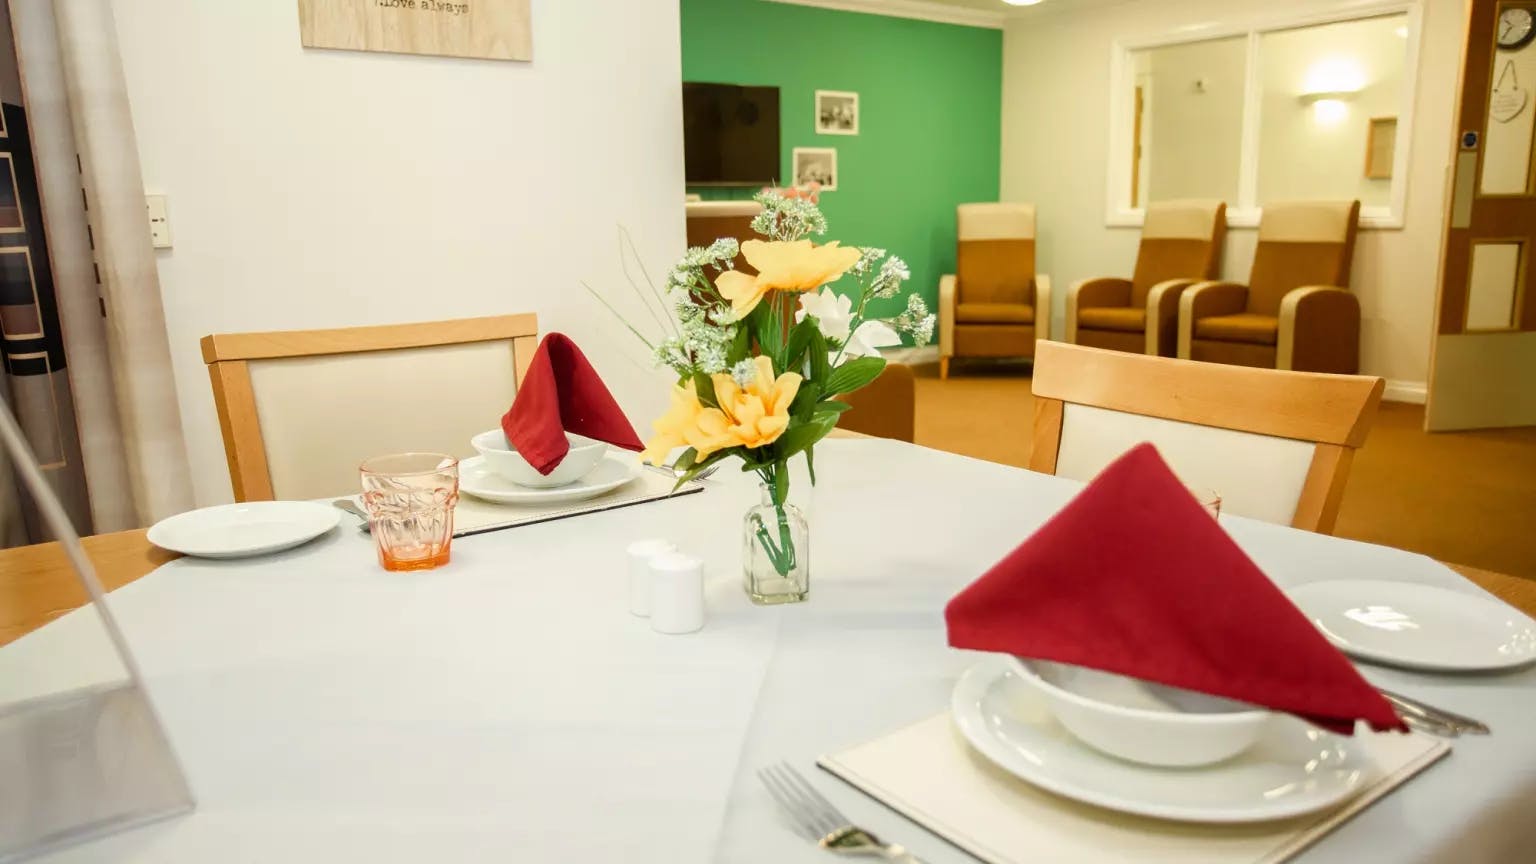 Dining area of Tye Green Lodge care home in Harlow, Essex